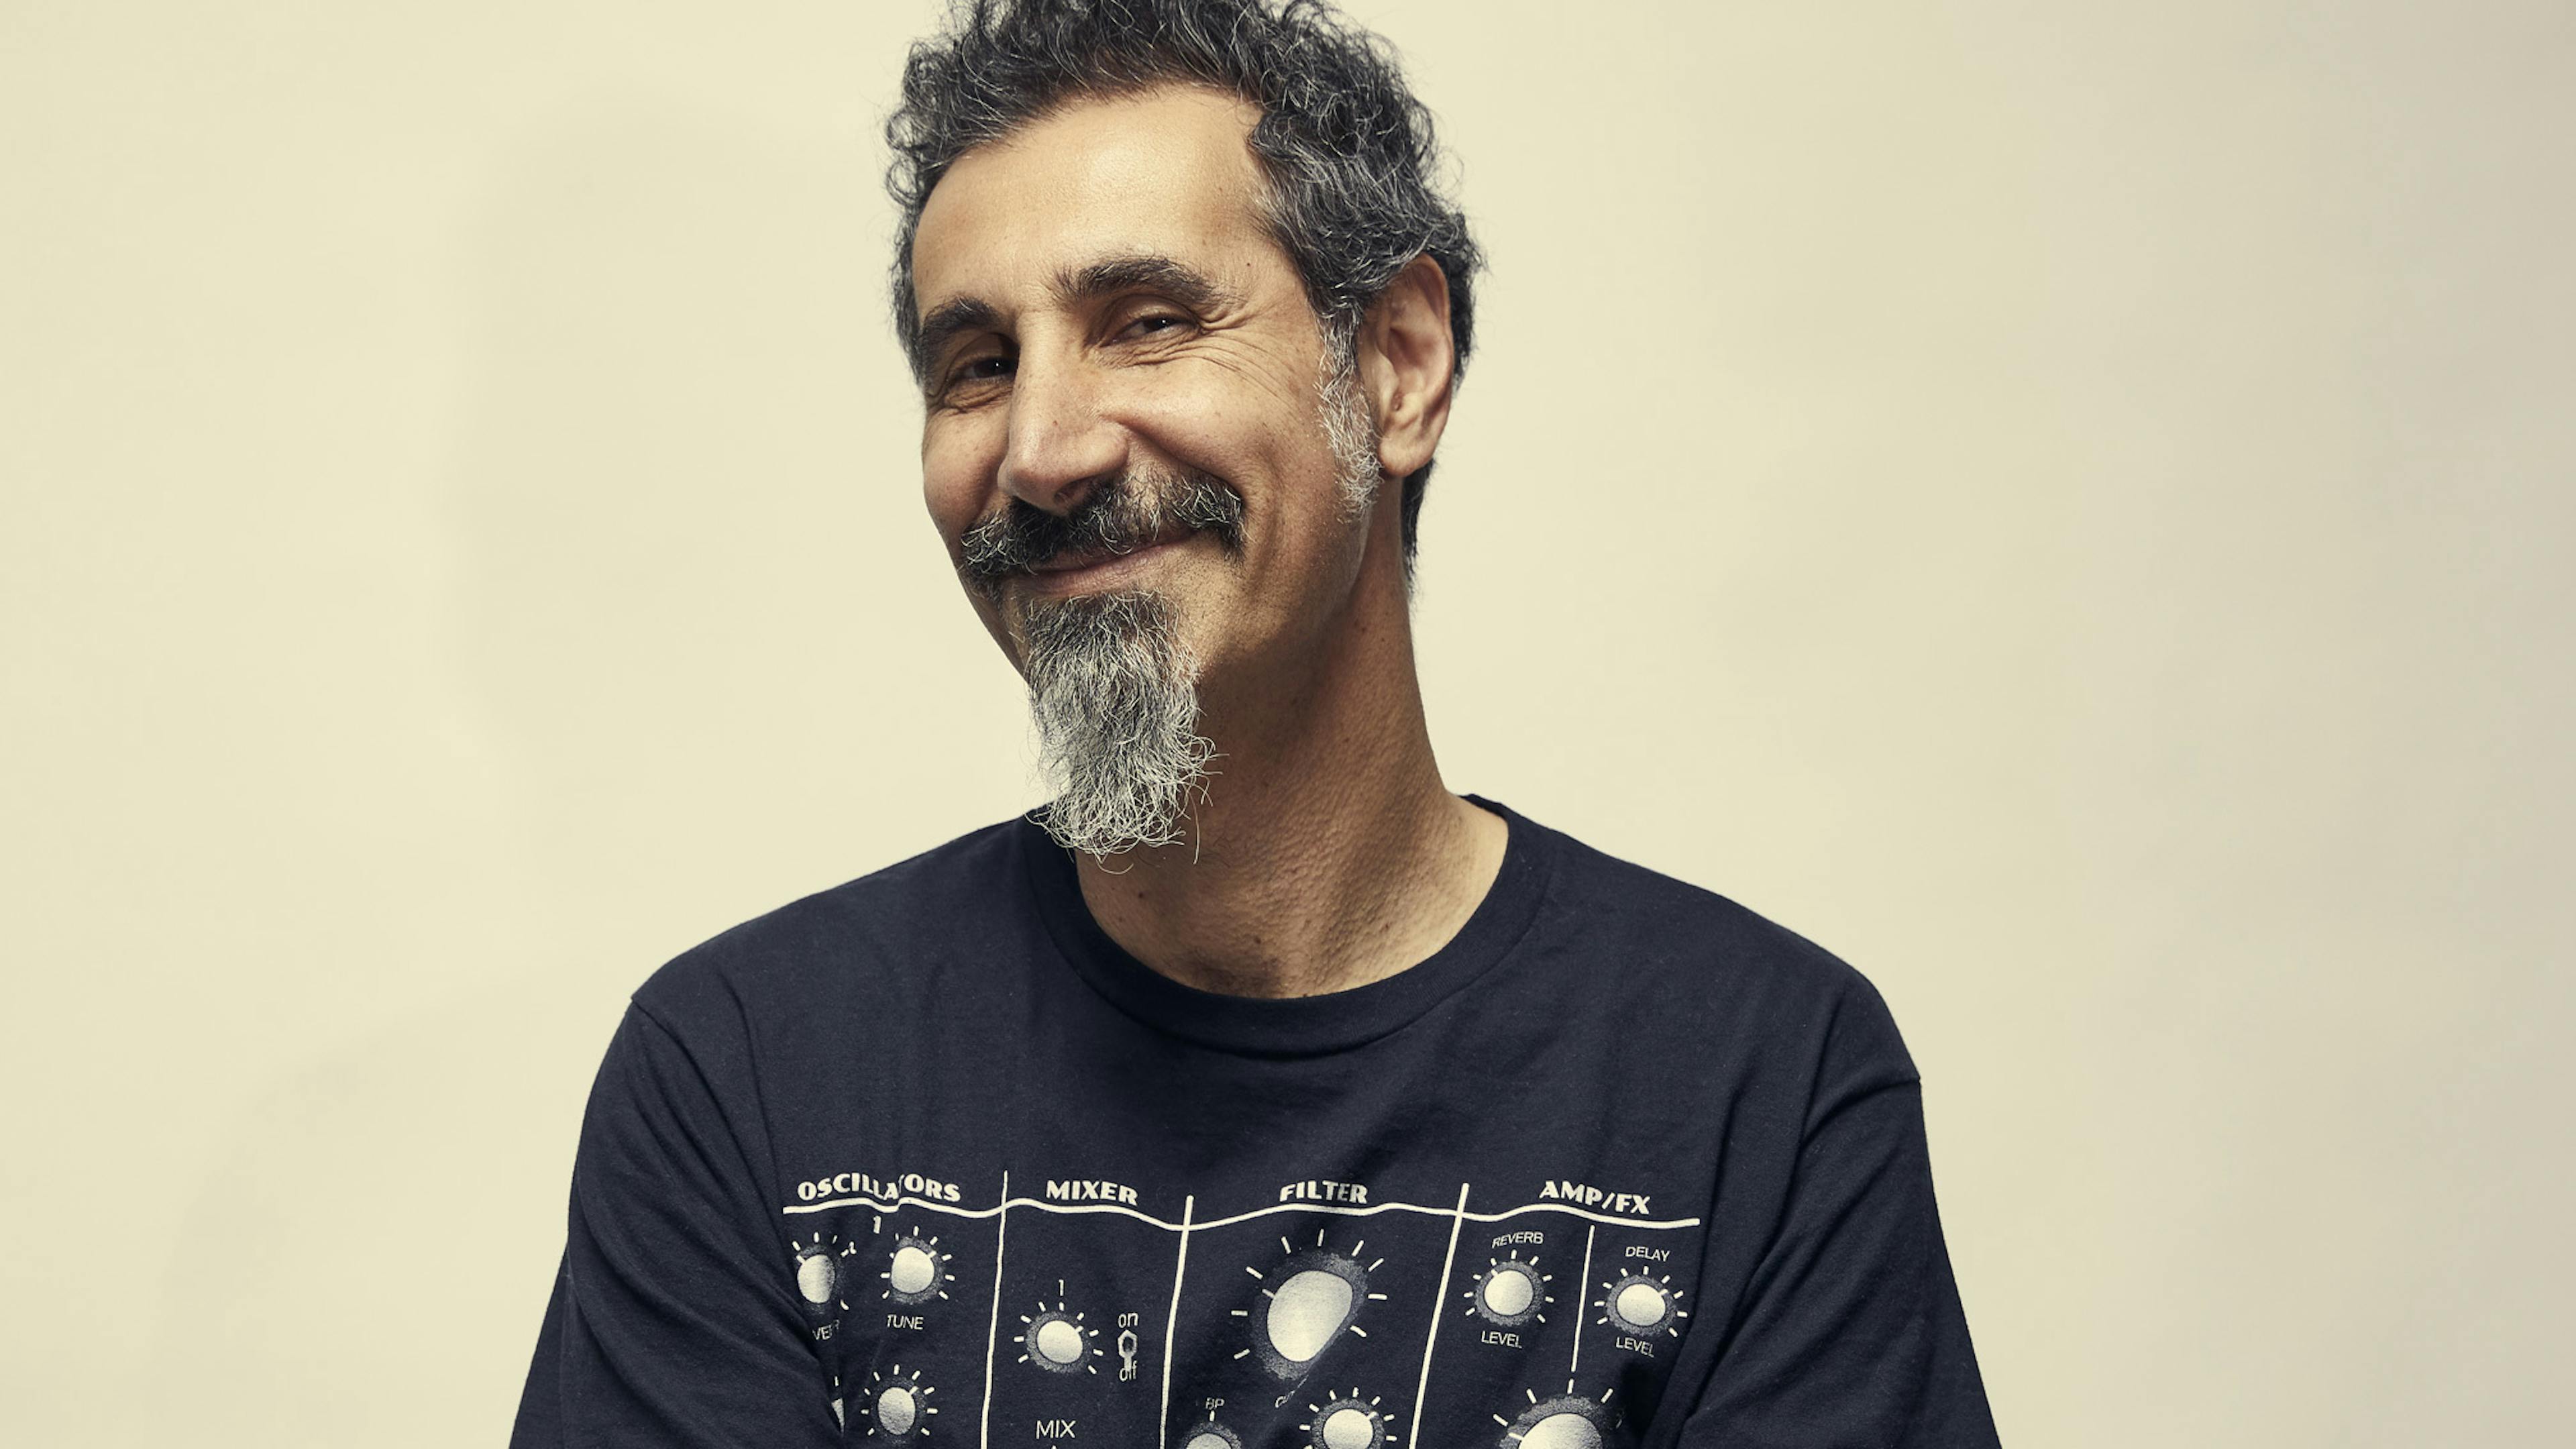 Serj Tankian gives COVID update: "I am doing well and hoping to be clear of all symptoms soon"